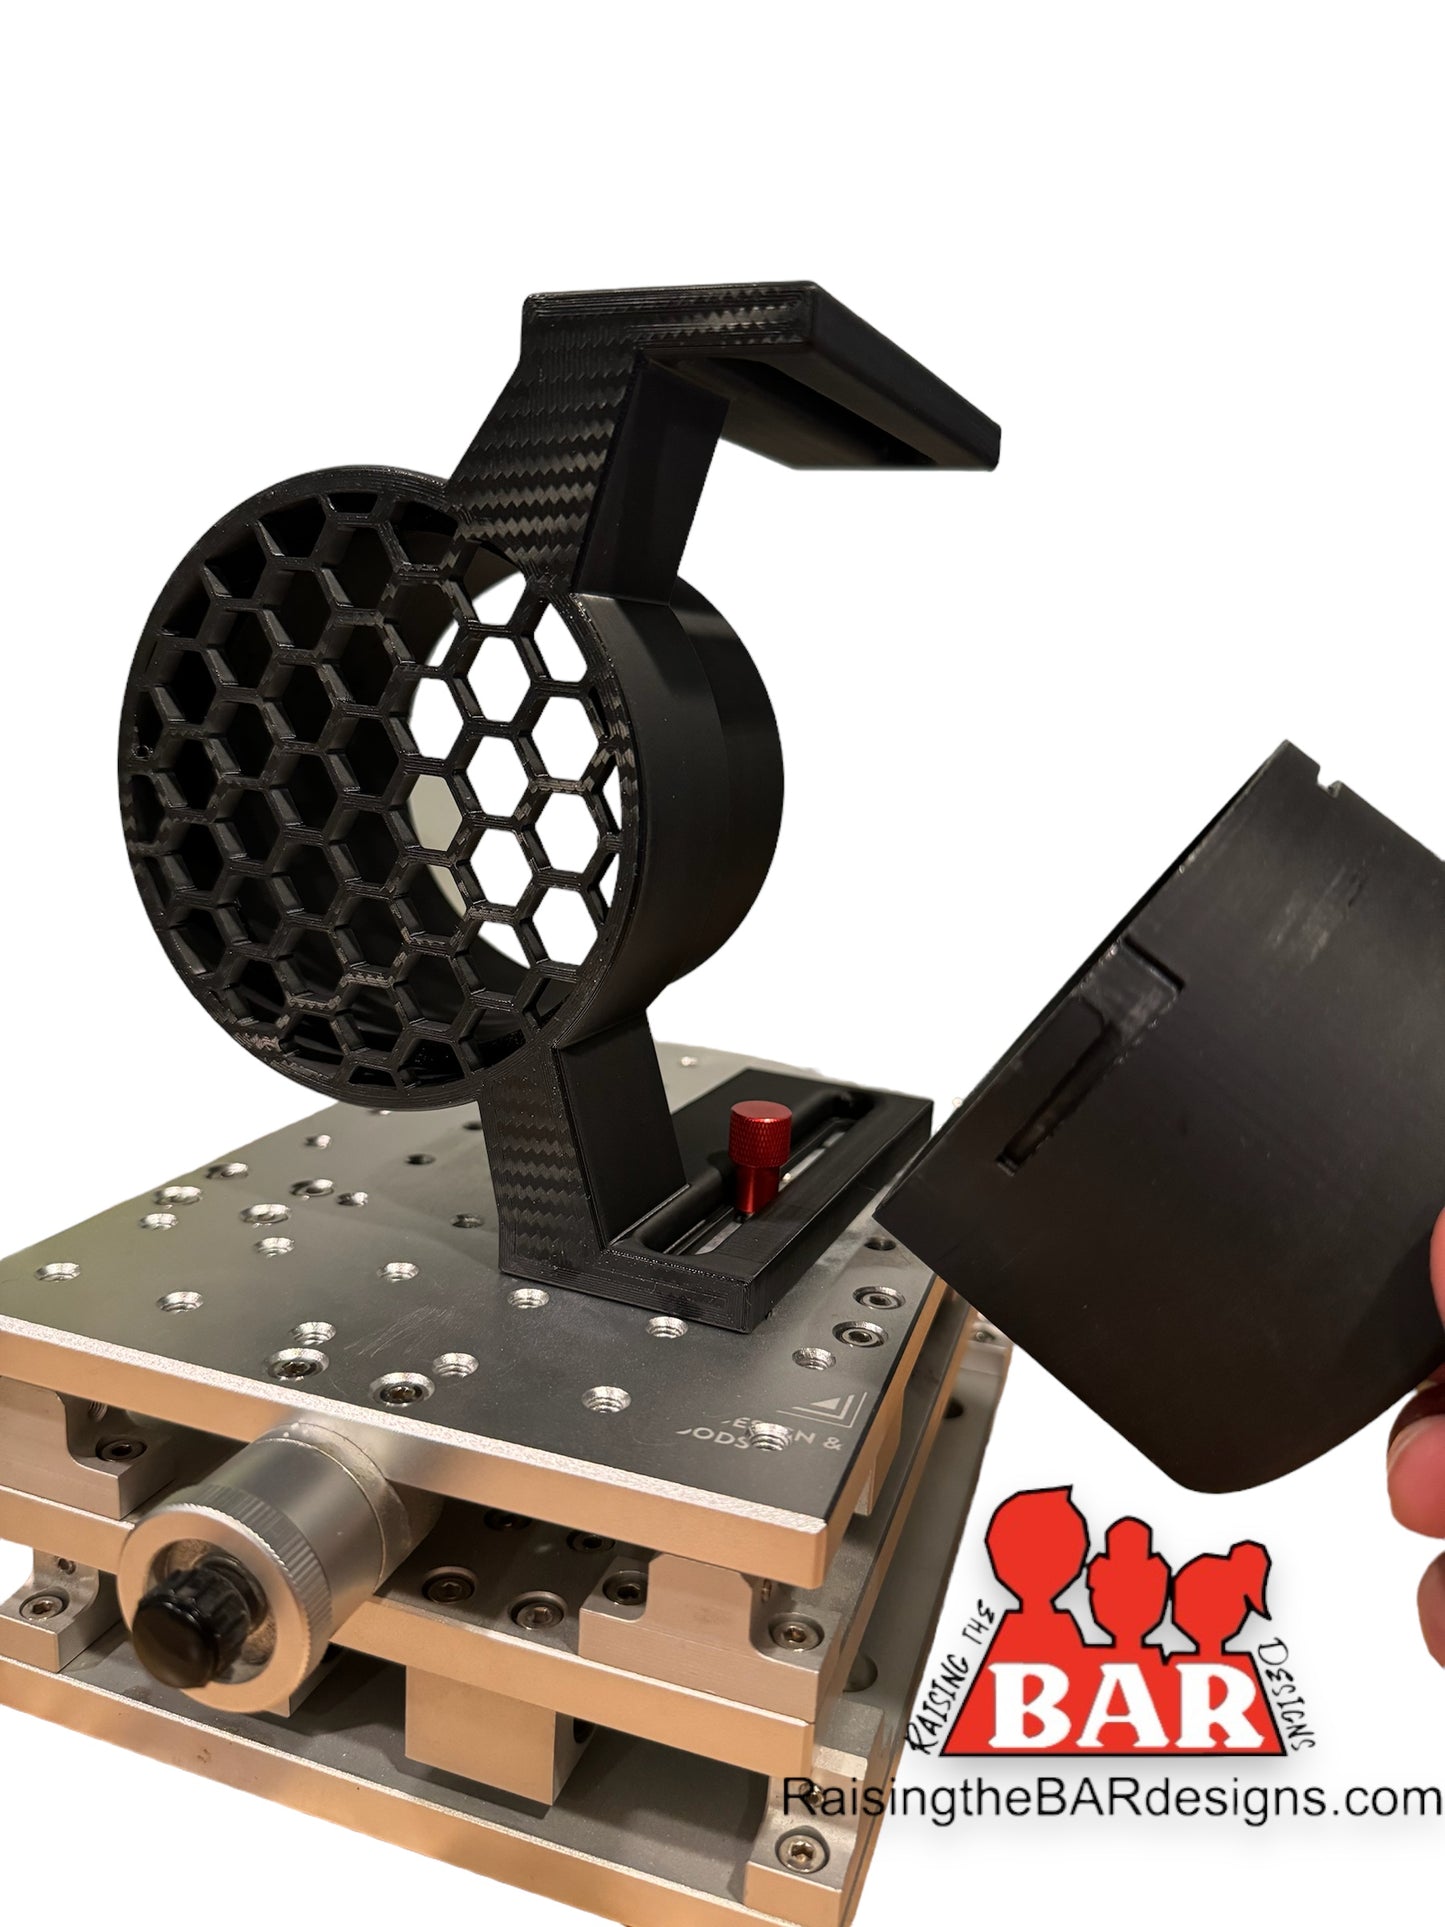 3D Printed Vent System tailored specifically for Fiber Laser Engravers